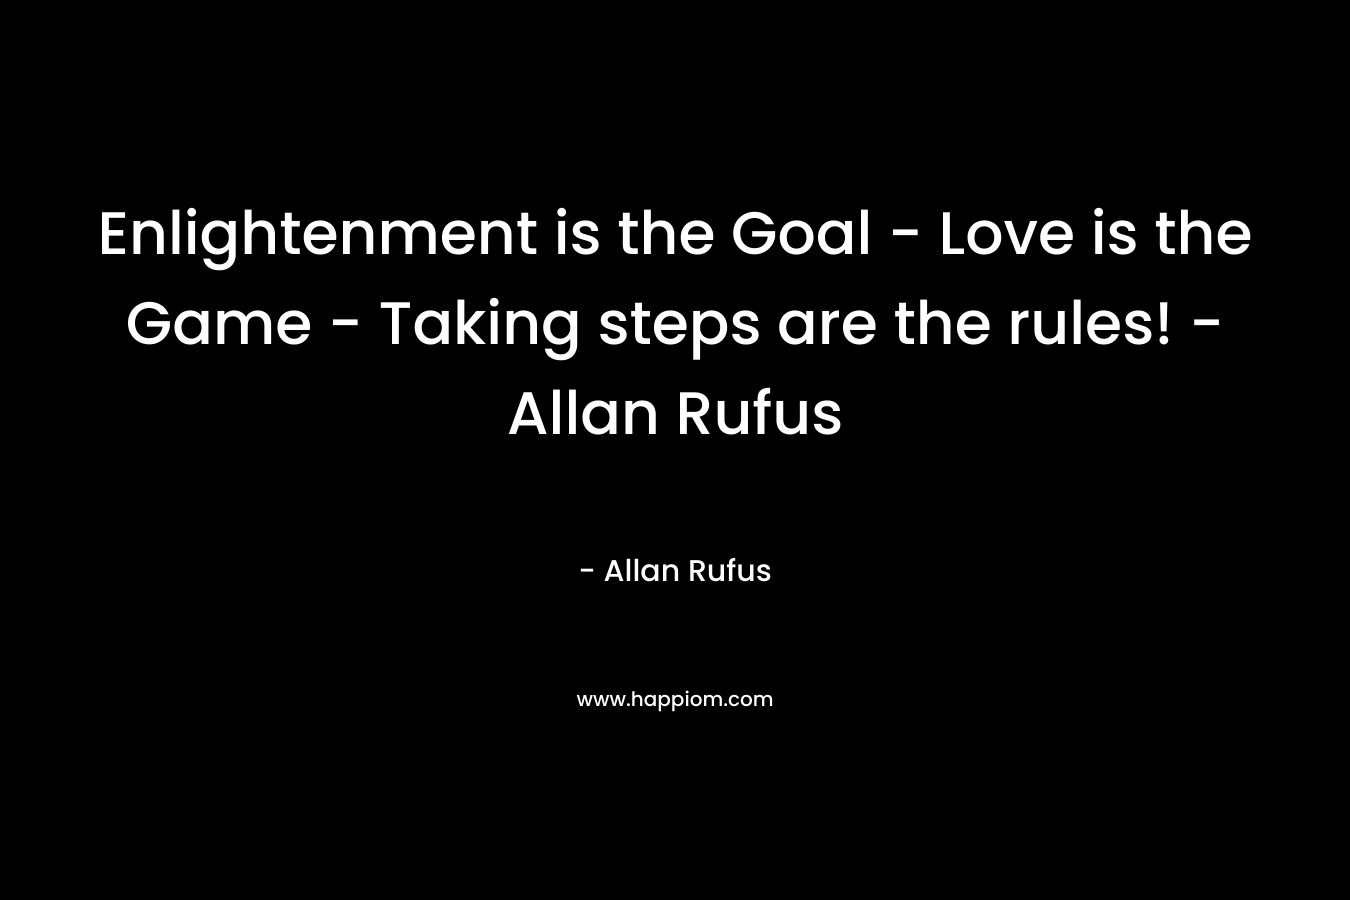 Enlightenment is the Goal - Love is the Game - Taking steps are the rules! - Allan Rufus